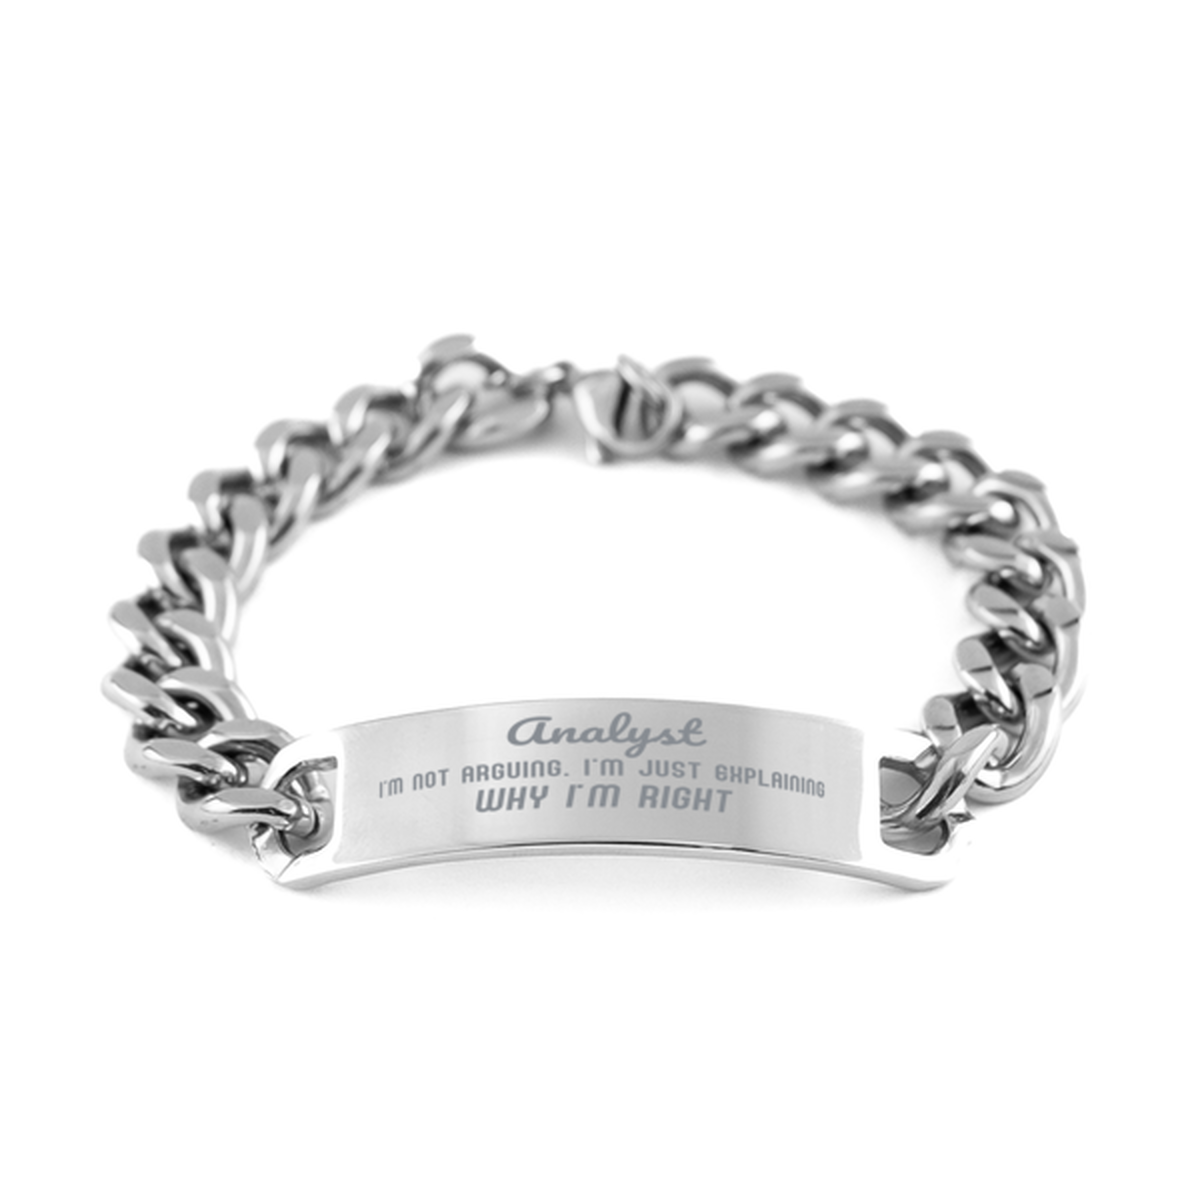 Analyst I'm not Arguing. I'm Just Explaining Why I'm RIGHT Cuban Chain Stainless Steel Bracelet, Graduation Birthday Christmas Analyst Gifts For Analyst Funny Saying Quote Present for Men Women Coworker